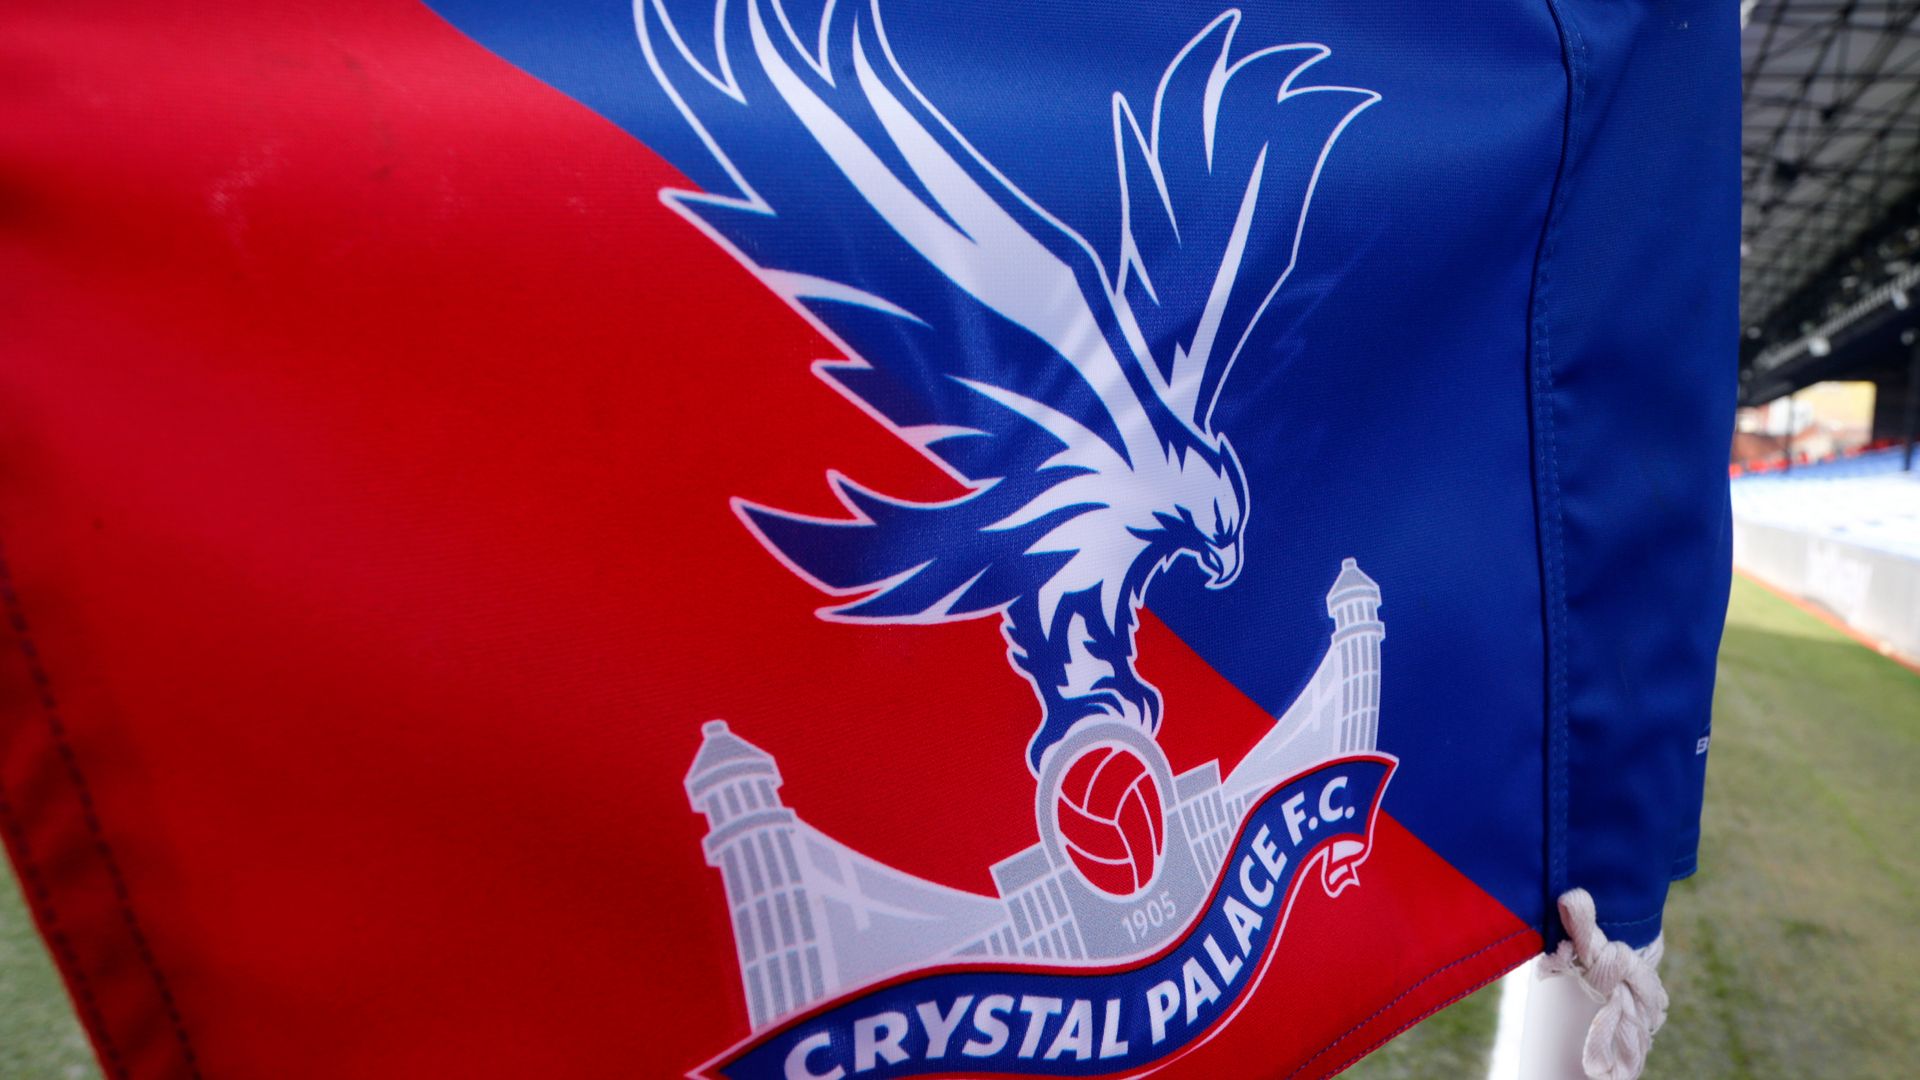 Palace youngster Raymond attracts European interest